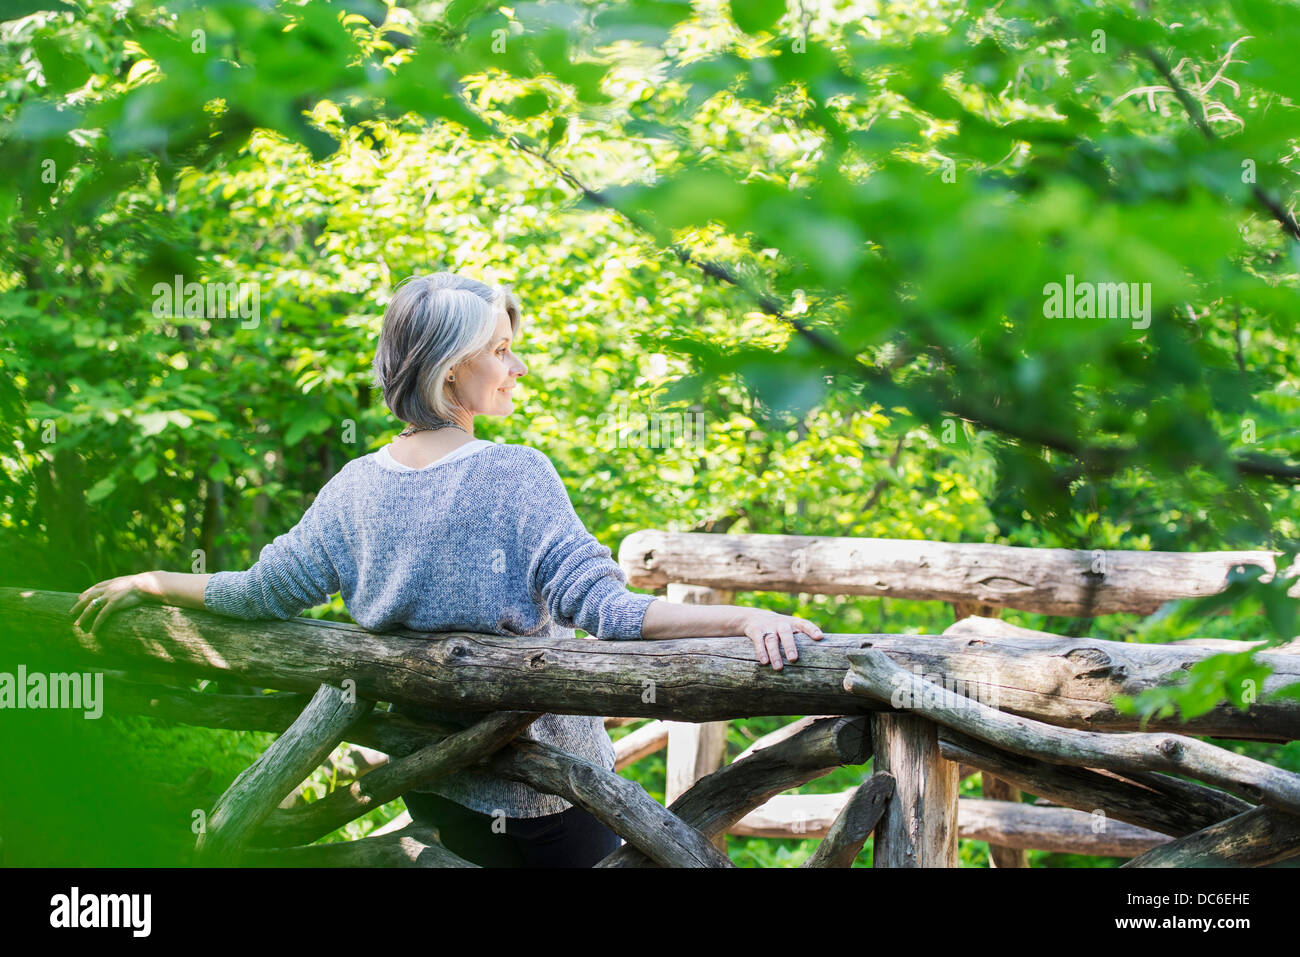 USA, New York, New York City, Central Park, Senior woman relaxing in park Stock Photo